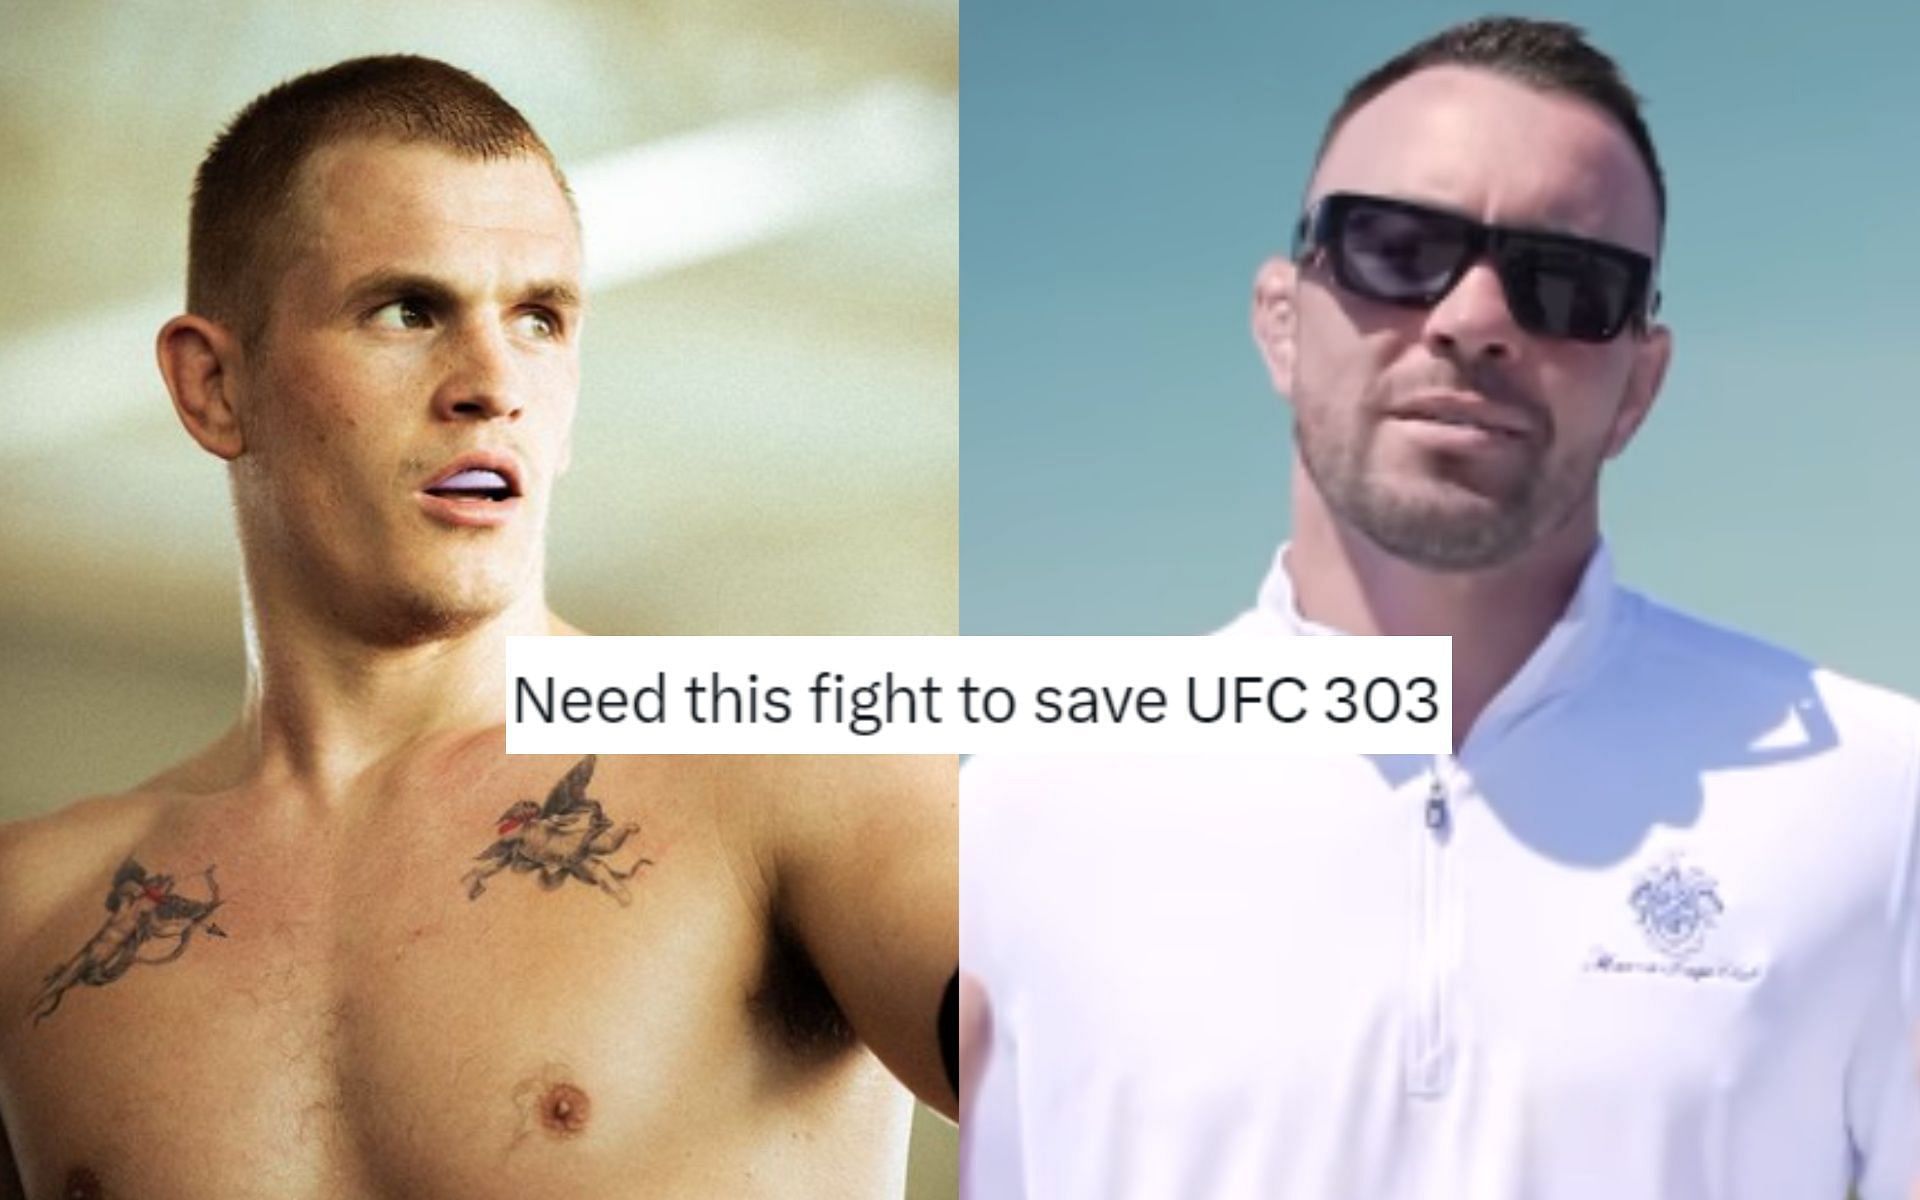 Ian Garry and Colby Covington continue to go back and forth on social media. [Images via @iangarry and @colbycovington on Instagram]